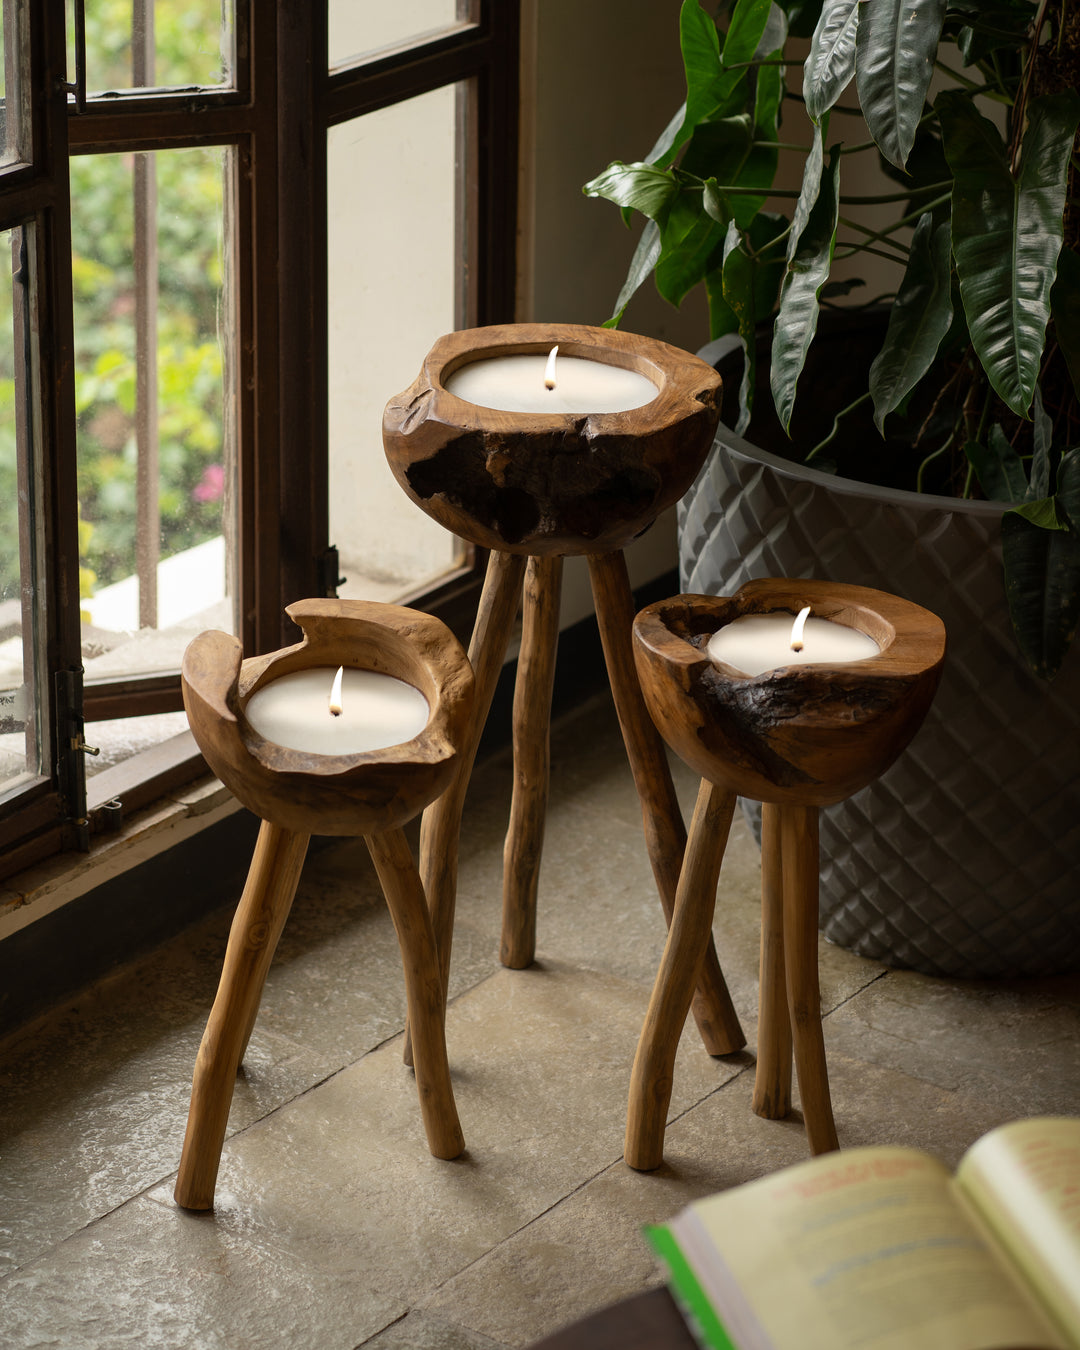 Candle in Wooden Bowl With Stand - Large